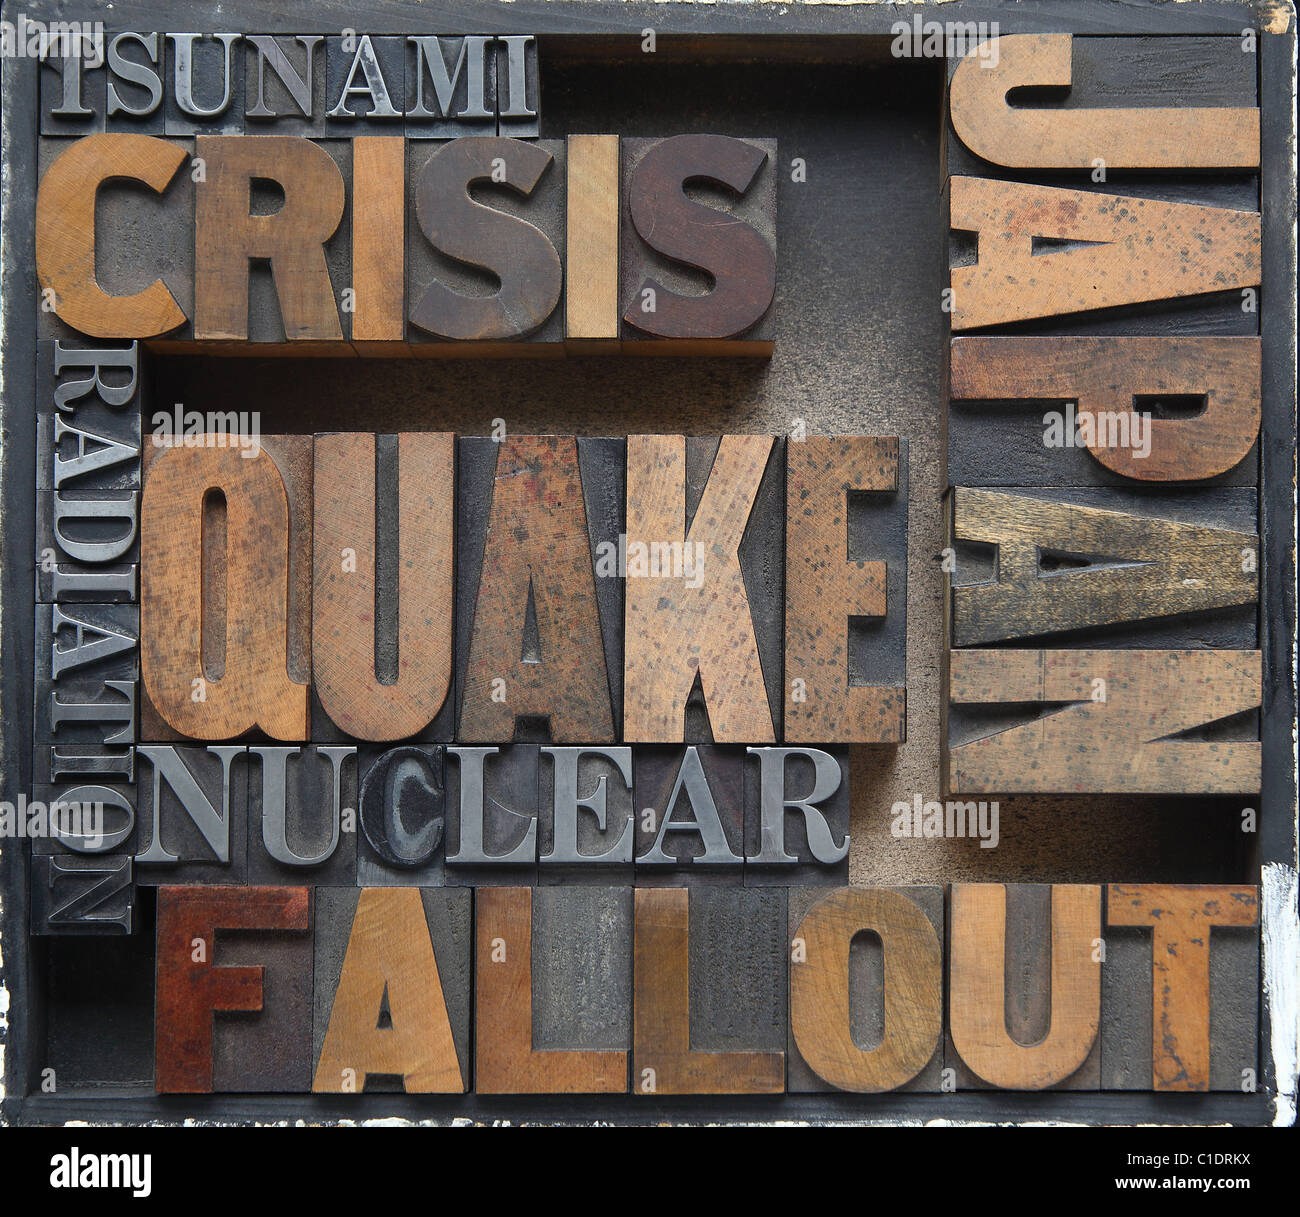 words related to Japan's earthquake, tsunami and nuclear disasters in old wood and metal type Stock Photo